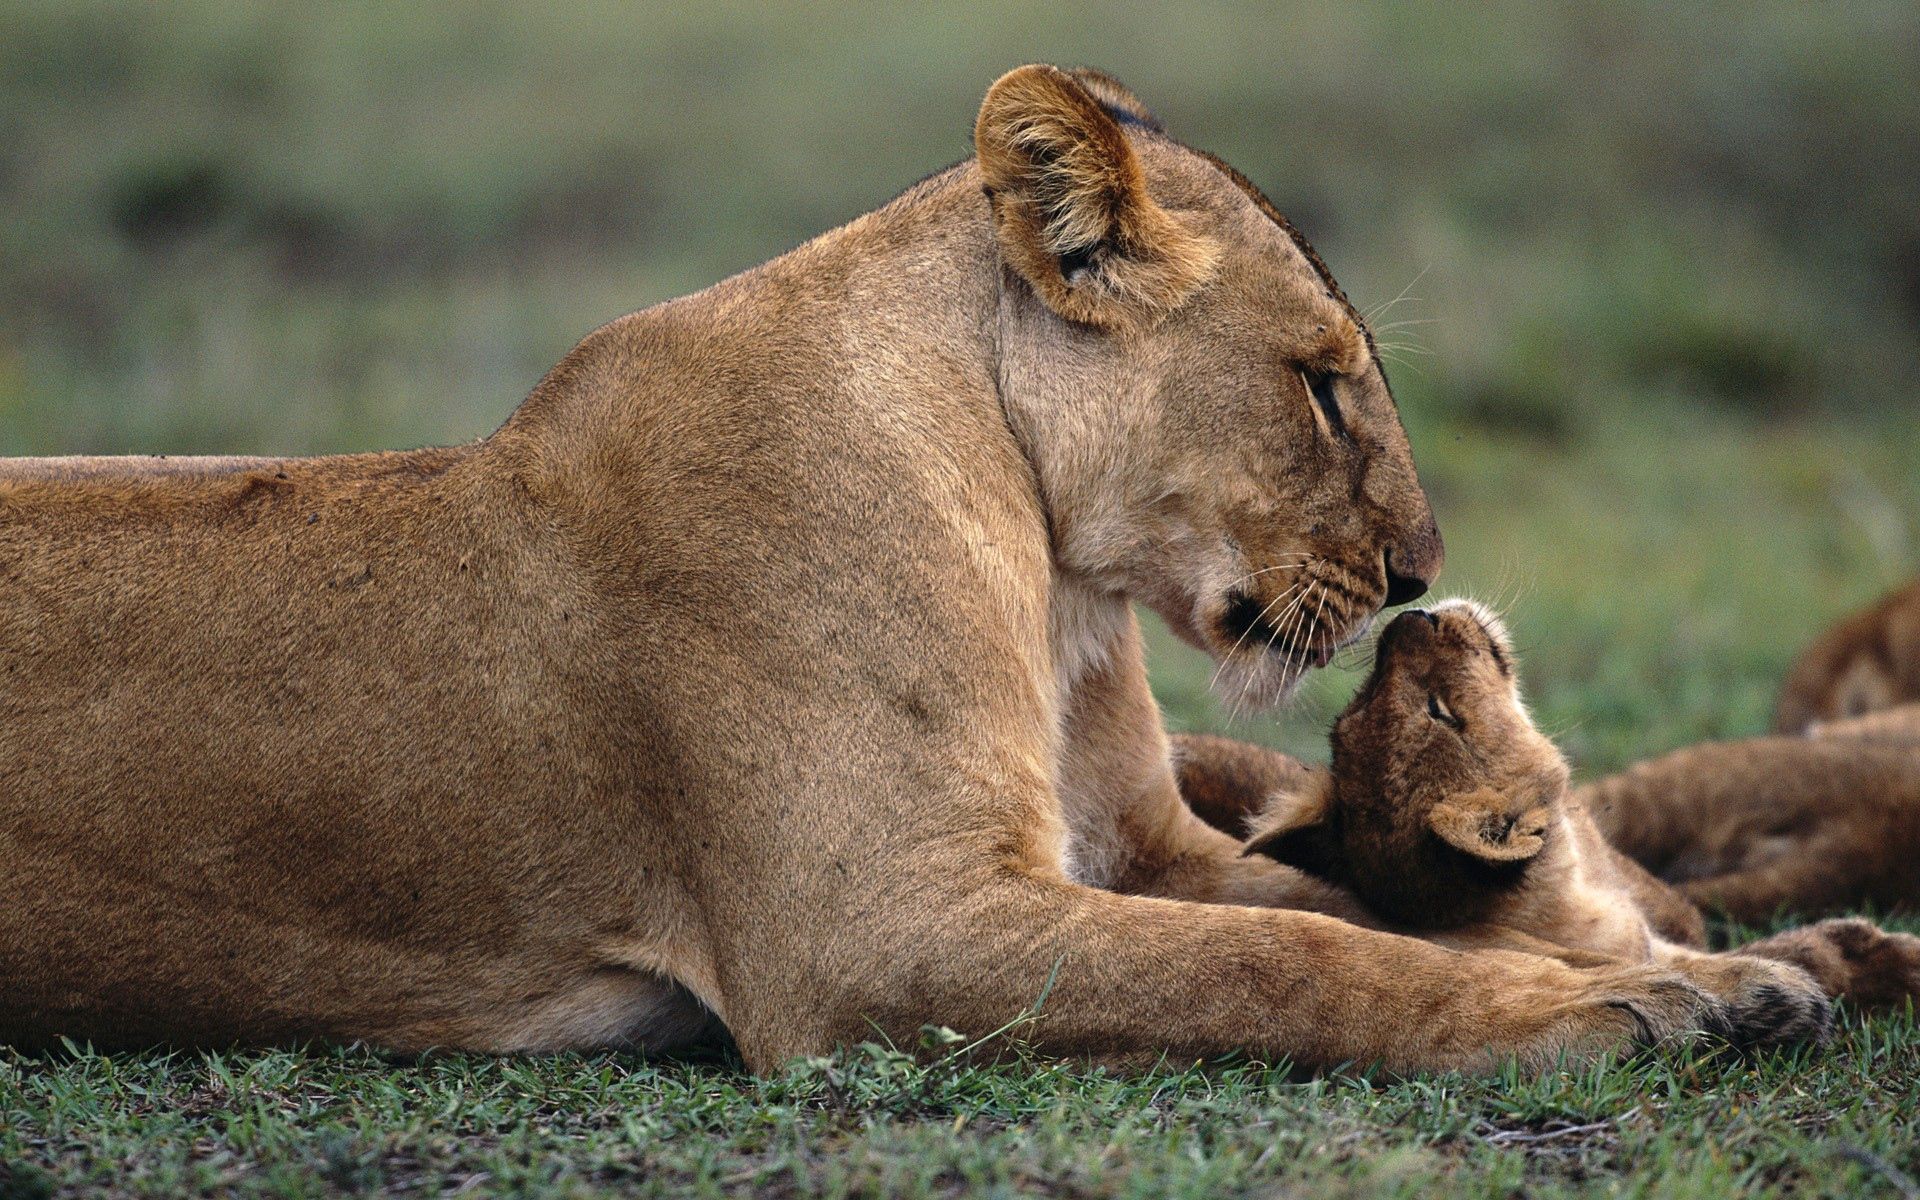 animals, grass, young, to lie down, lie, lioness, care, joey